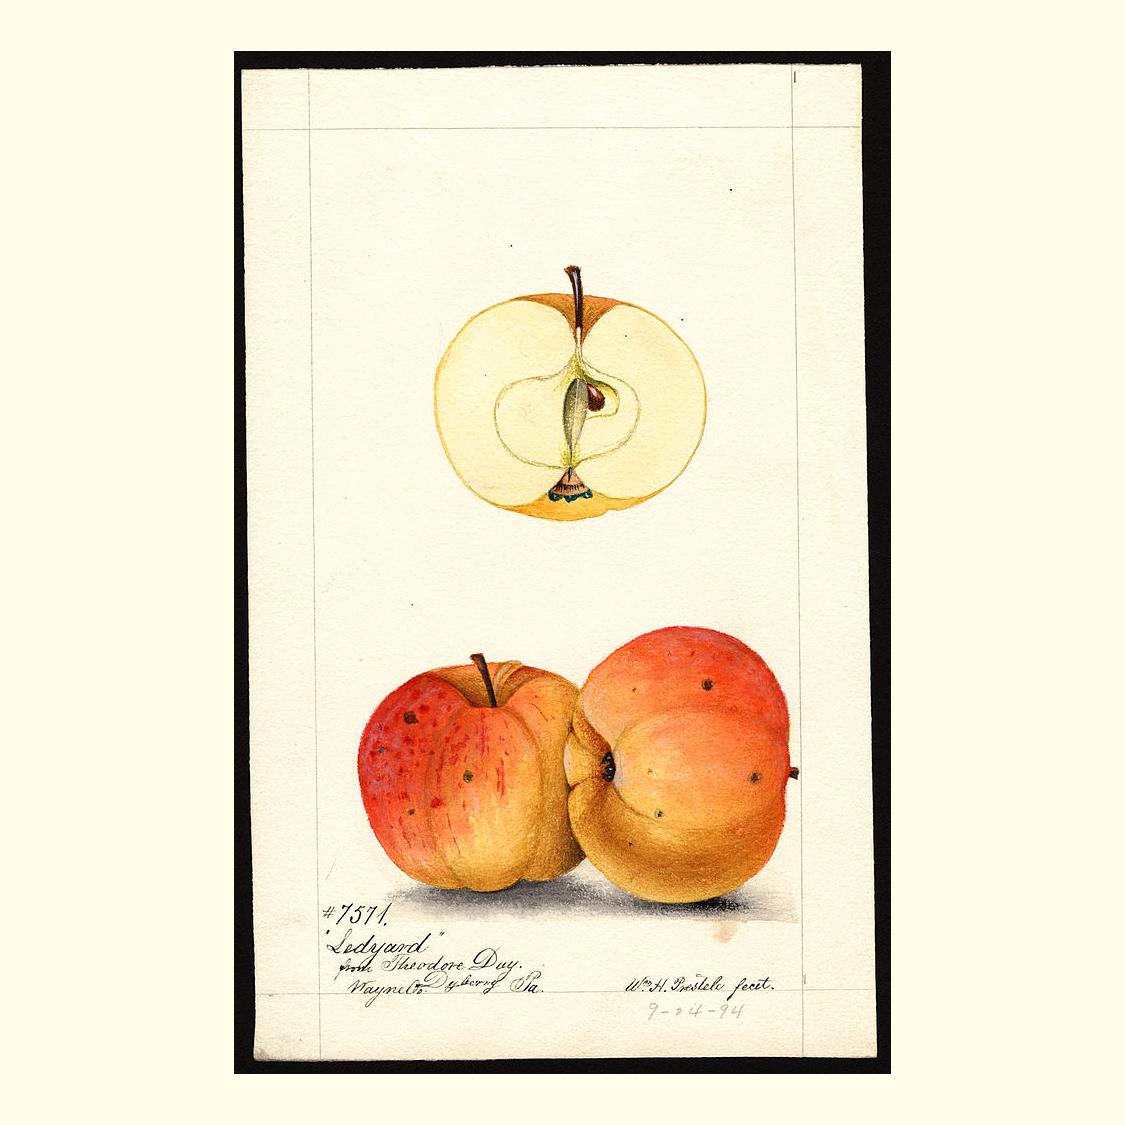 ledyard apples, painted by william henry prestele, 1894pic.twitter.com/A00J...